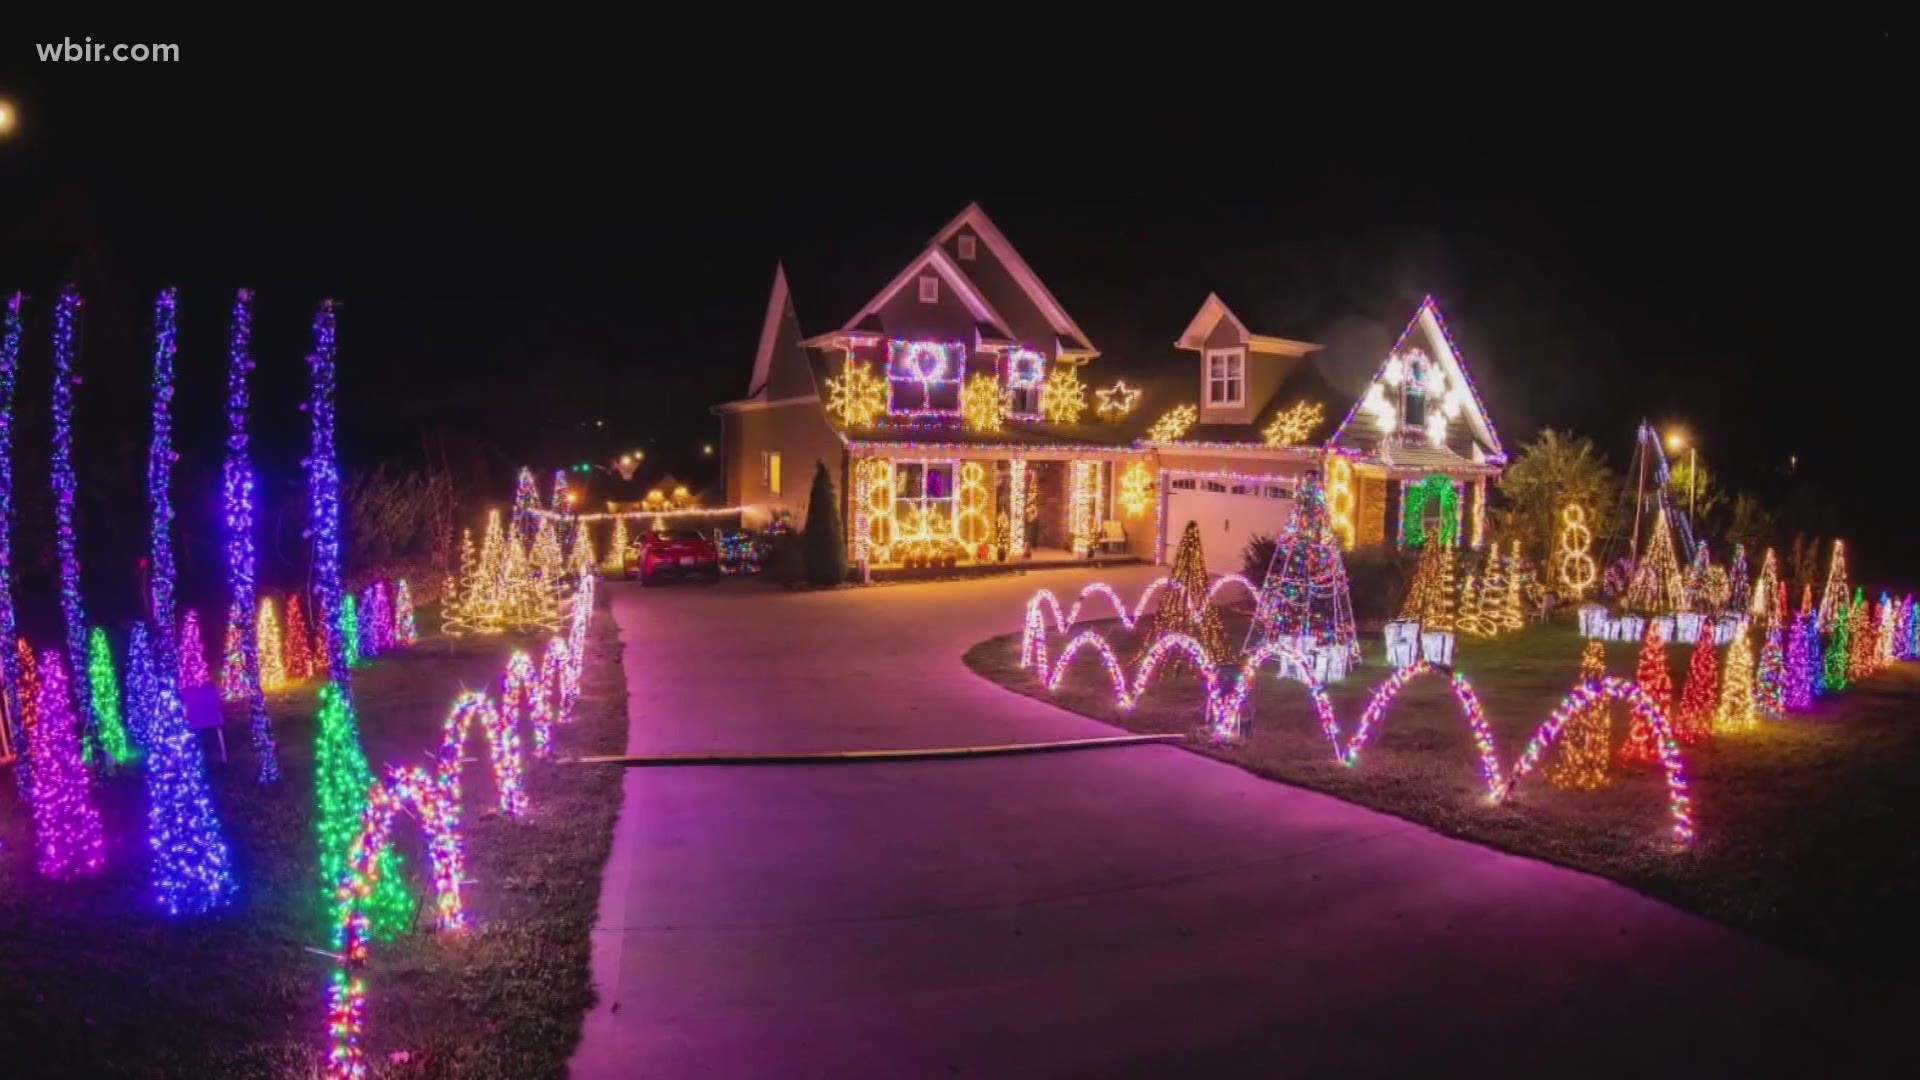 Ready or not, Christmas is coming! One Maryville family puts up a large Christmas lights display every holiday season in their front yard.